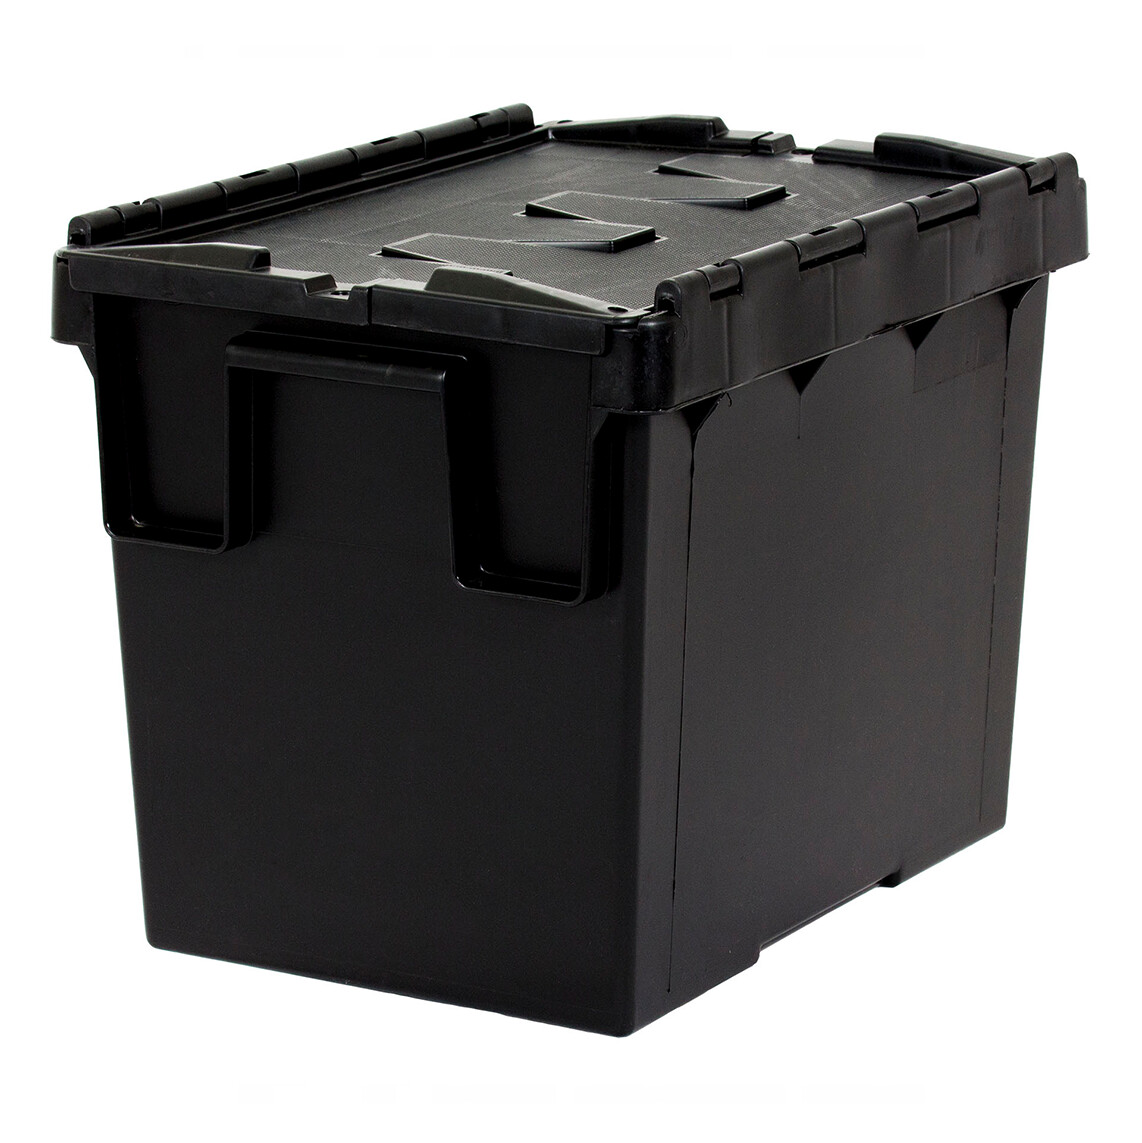 SECURITY CONTAINER BLACK 400 X 297 X 315MM